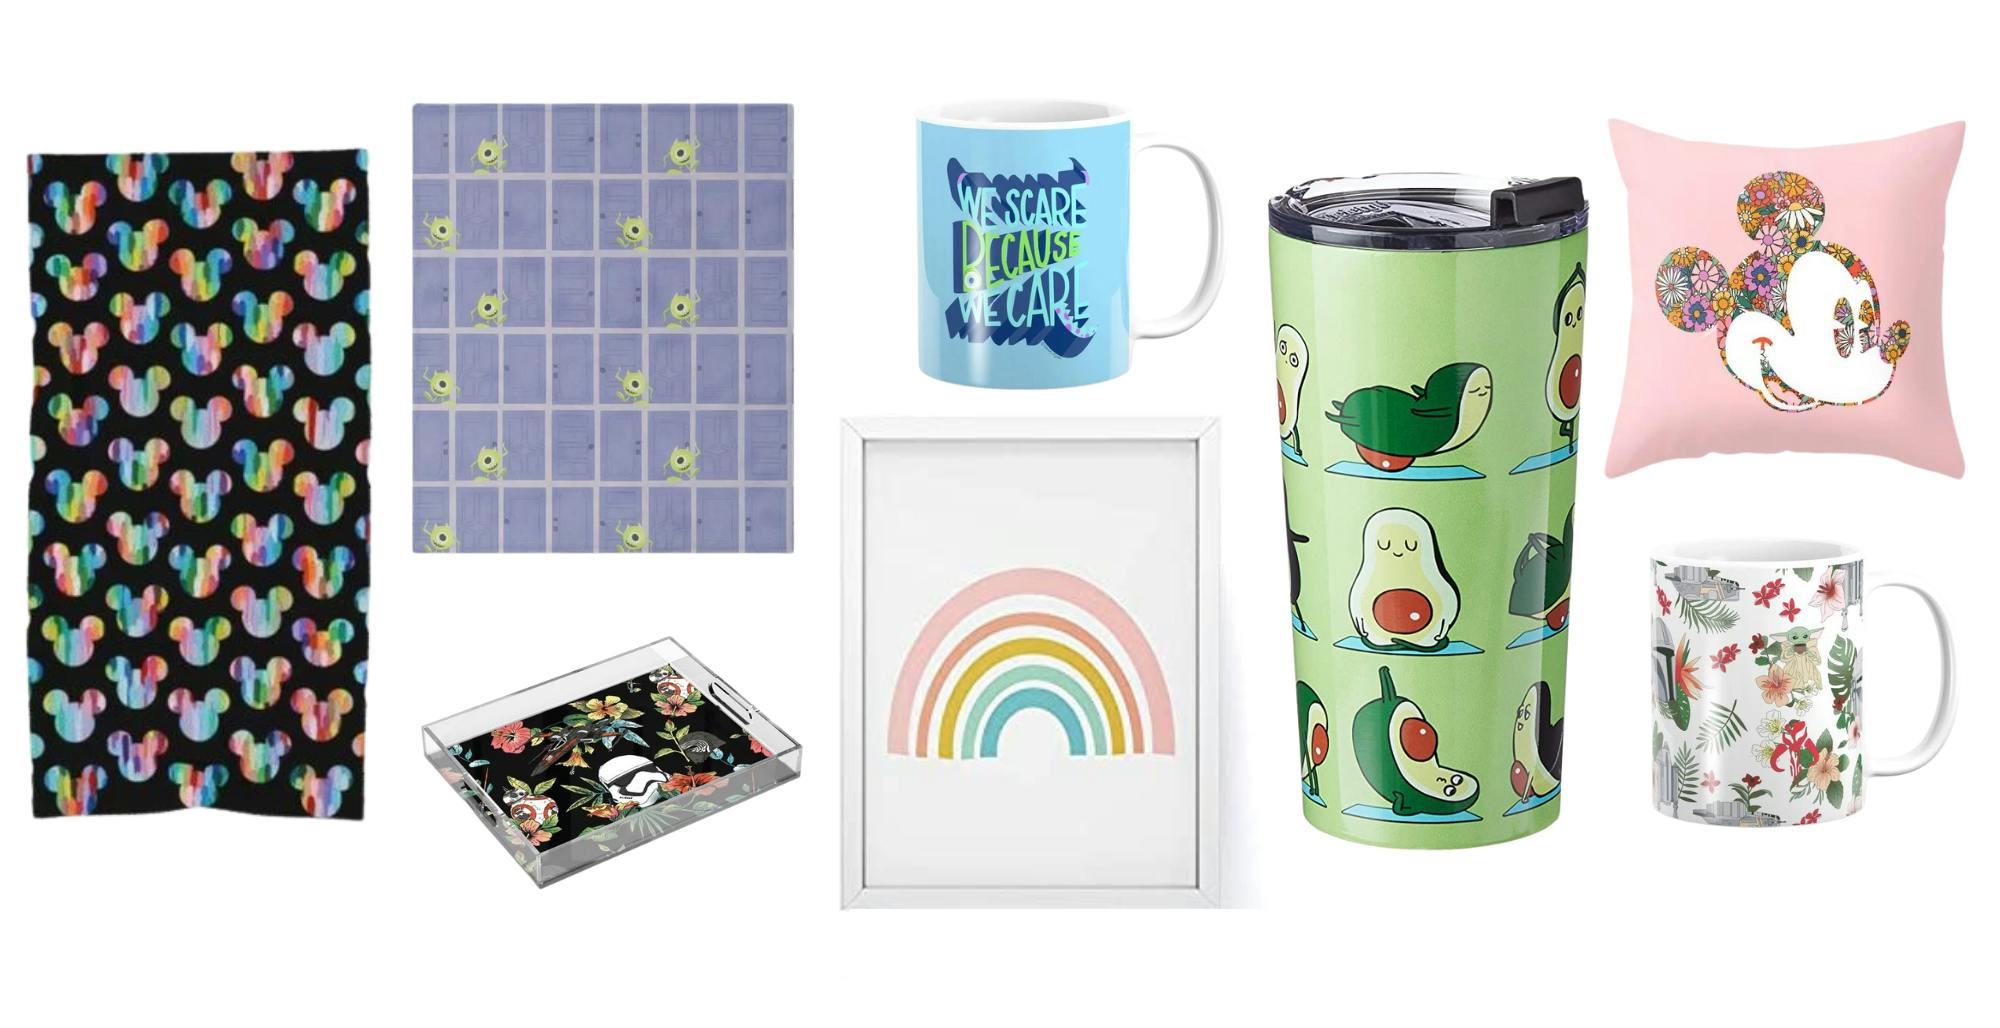 How to Find Extra Savings at Society6 and Score Free Shipping